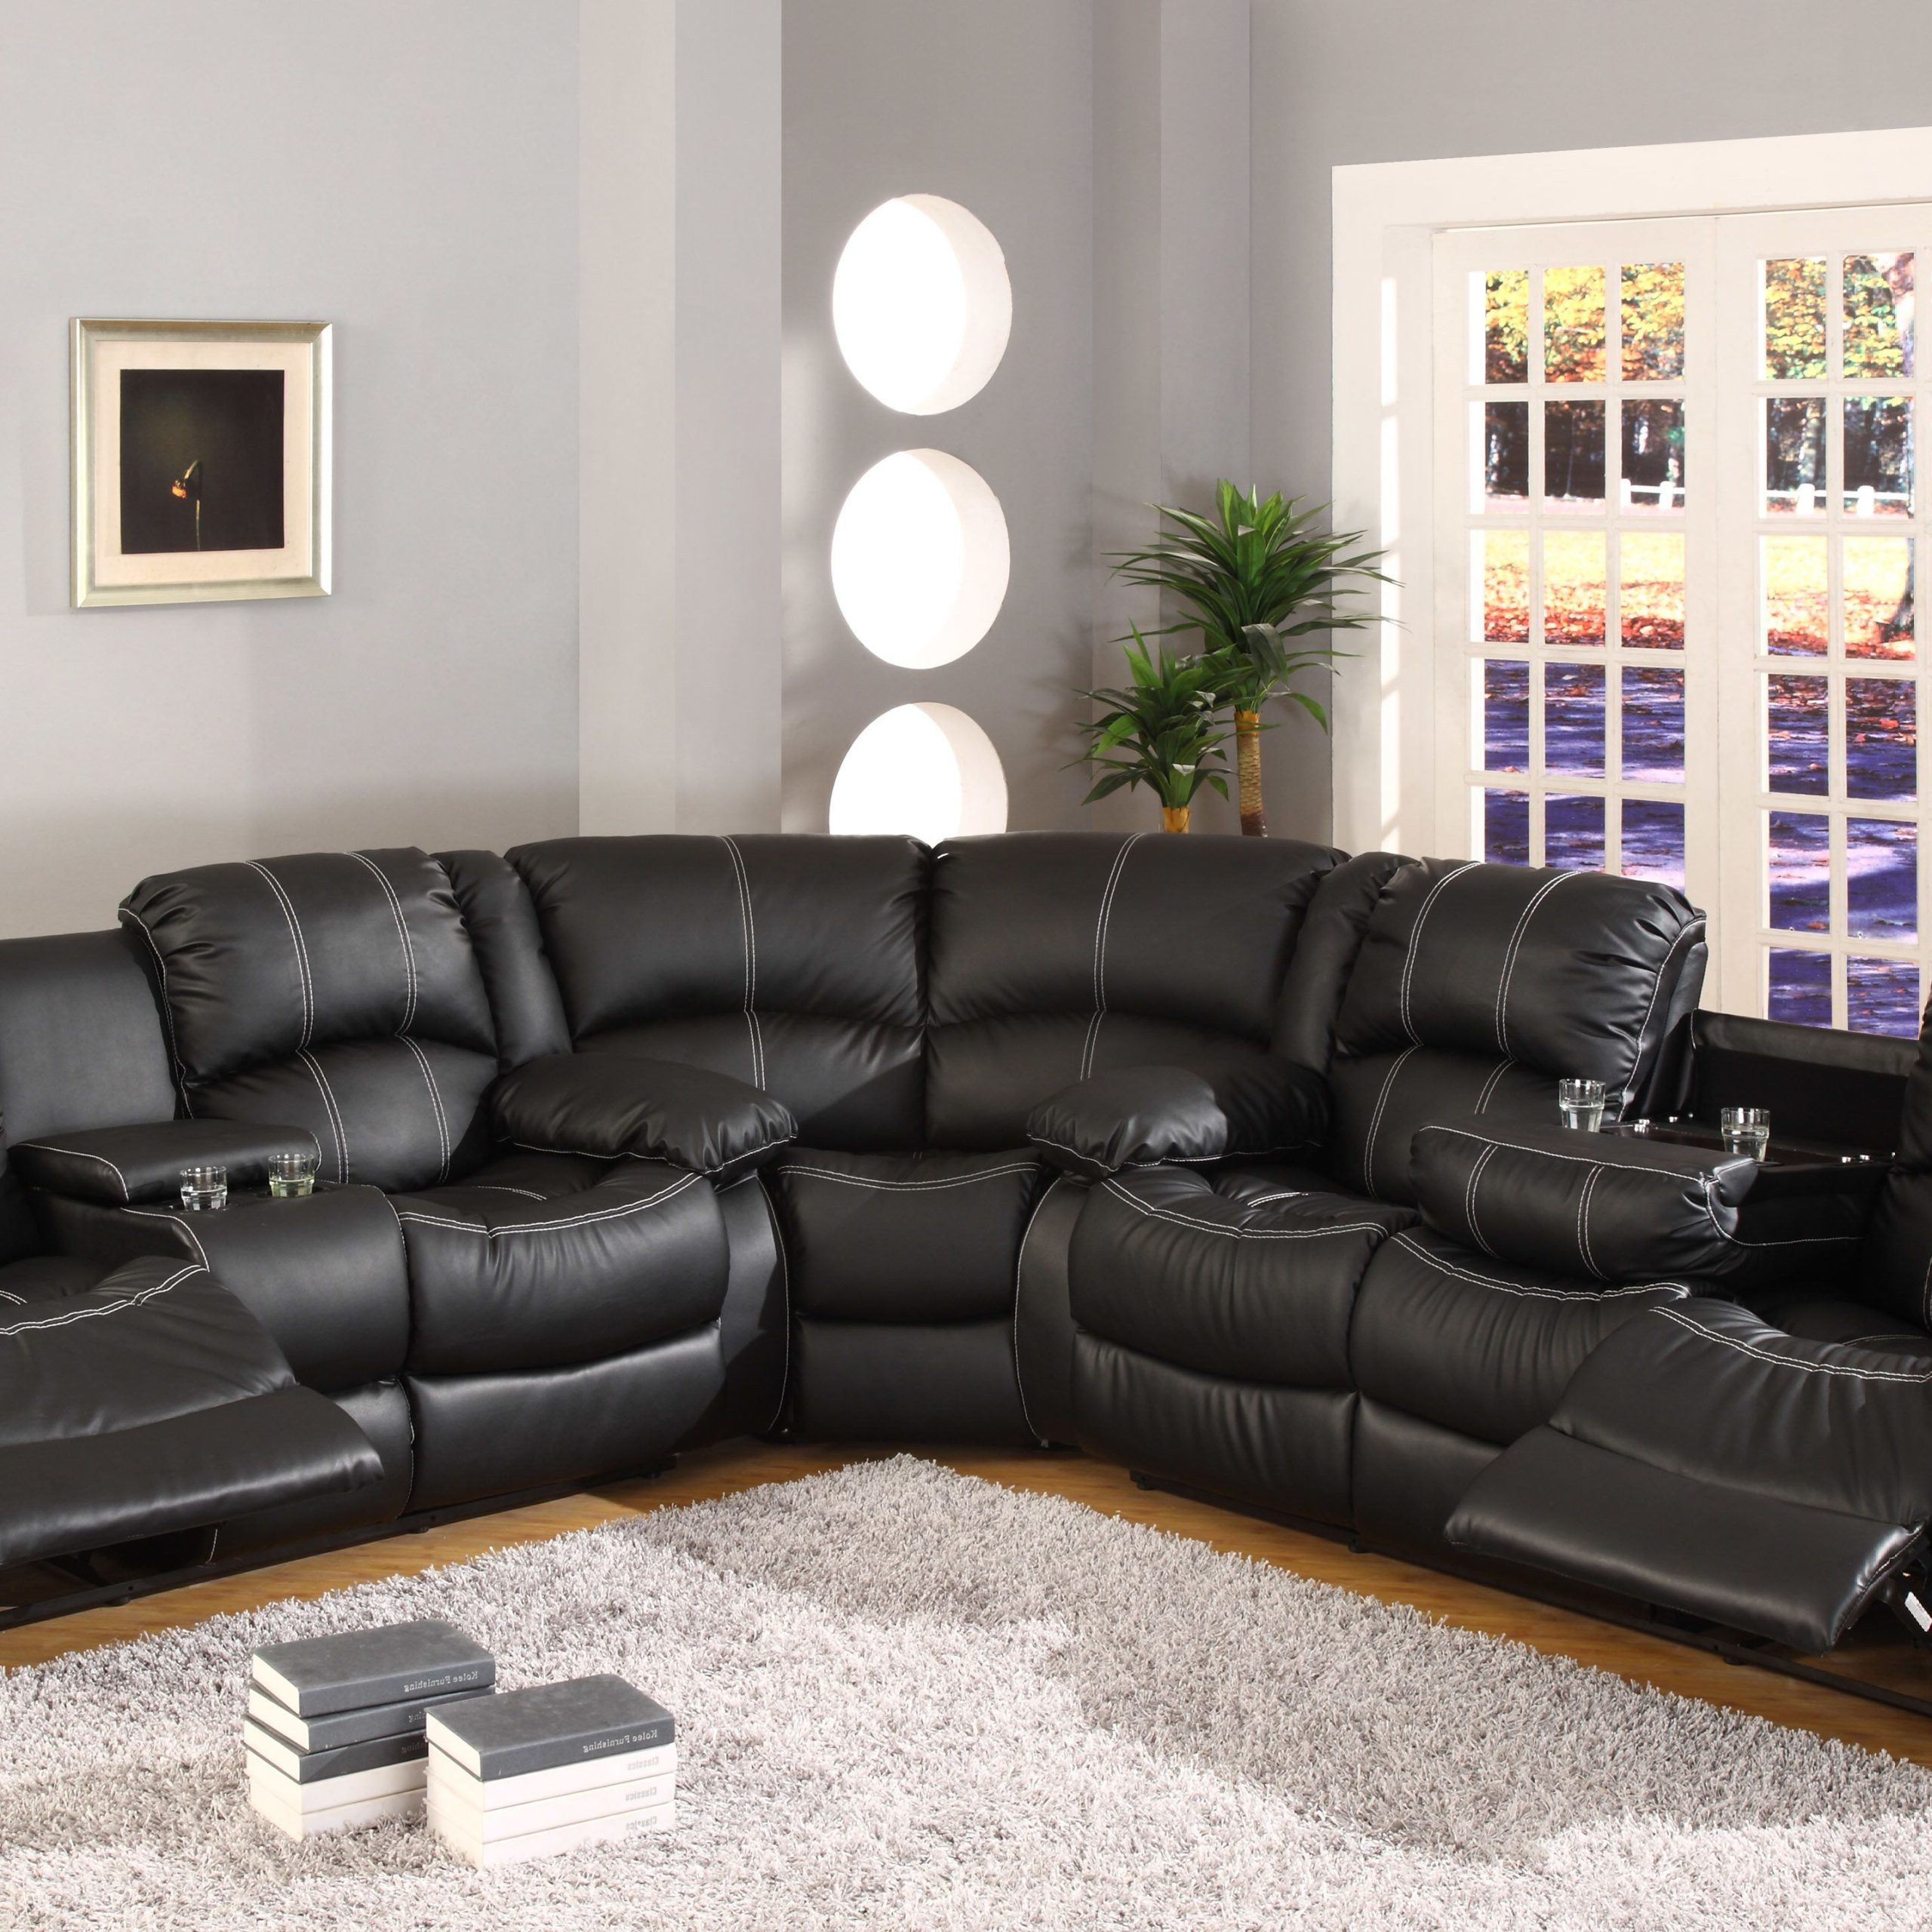 Hattie Comfort Reclining Sectional | Sectional Sofa With Recliner For Right Facing Black Sofas (View 3 of 20)